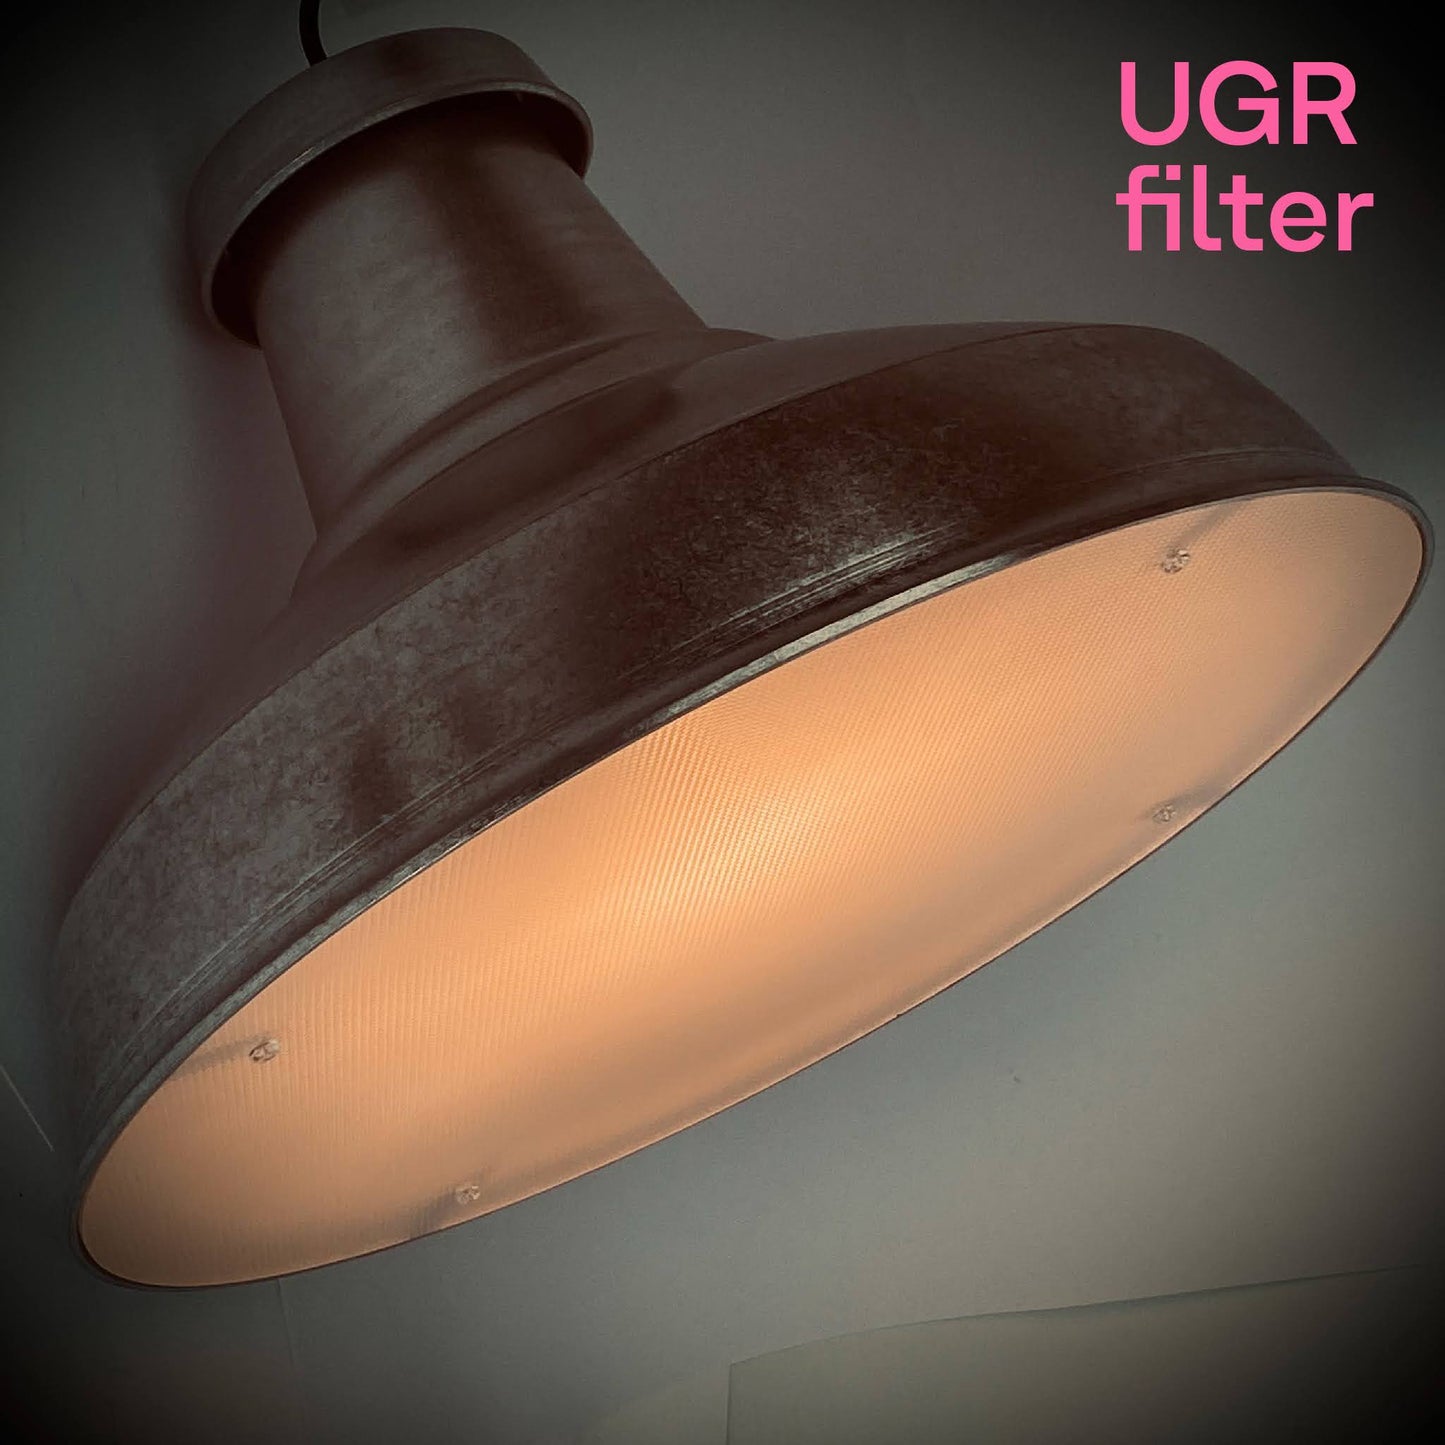 A UGR filter accessory attached to an architectural pendant light that's designed for circular economy